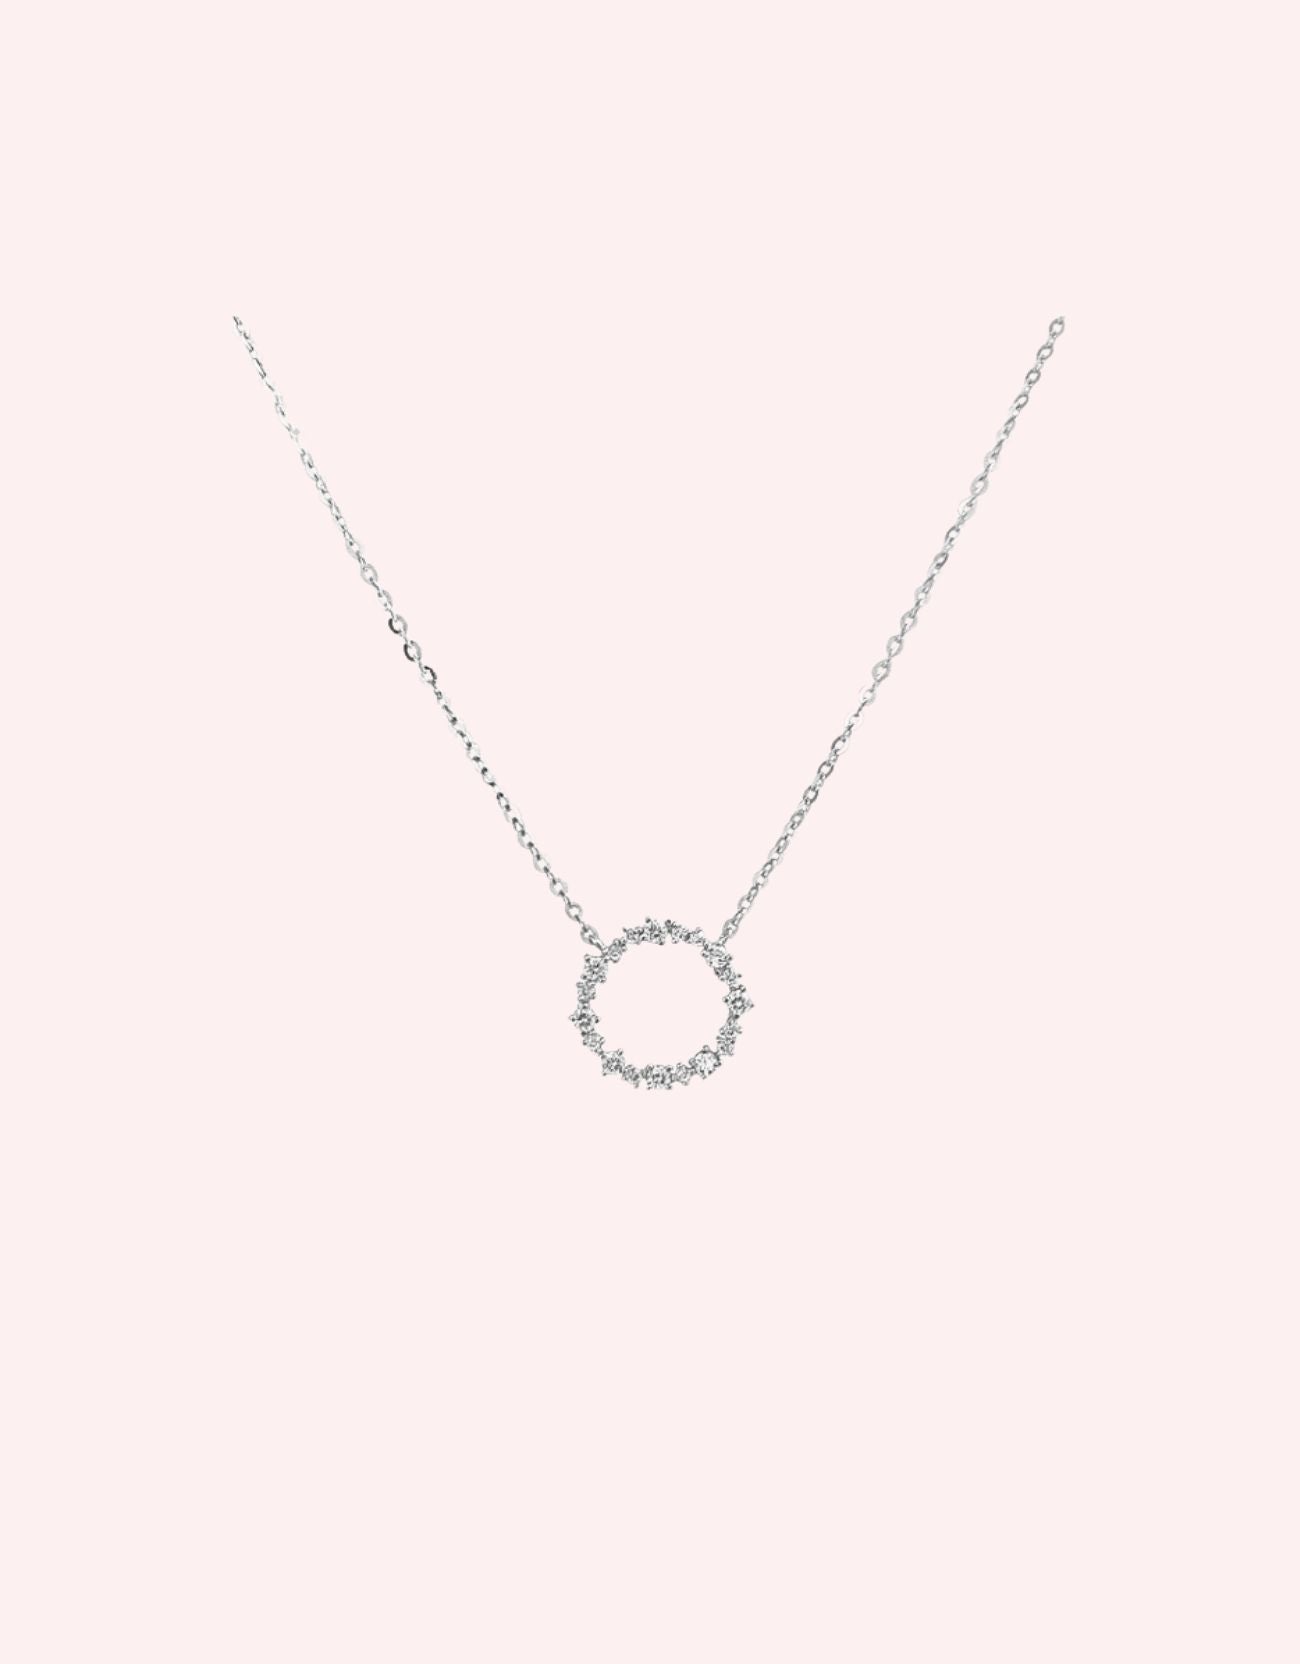 Arabella necklace silver - Smoothie London - Sterling Silver